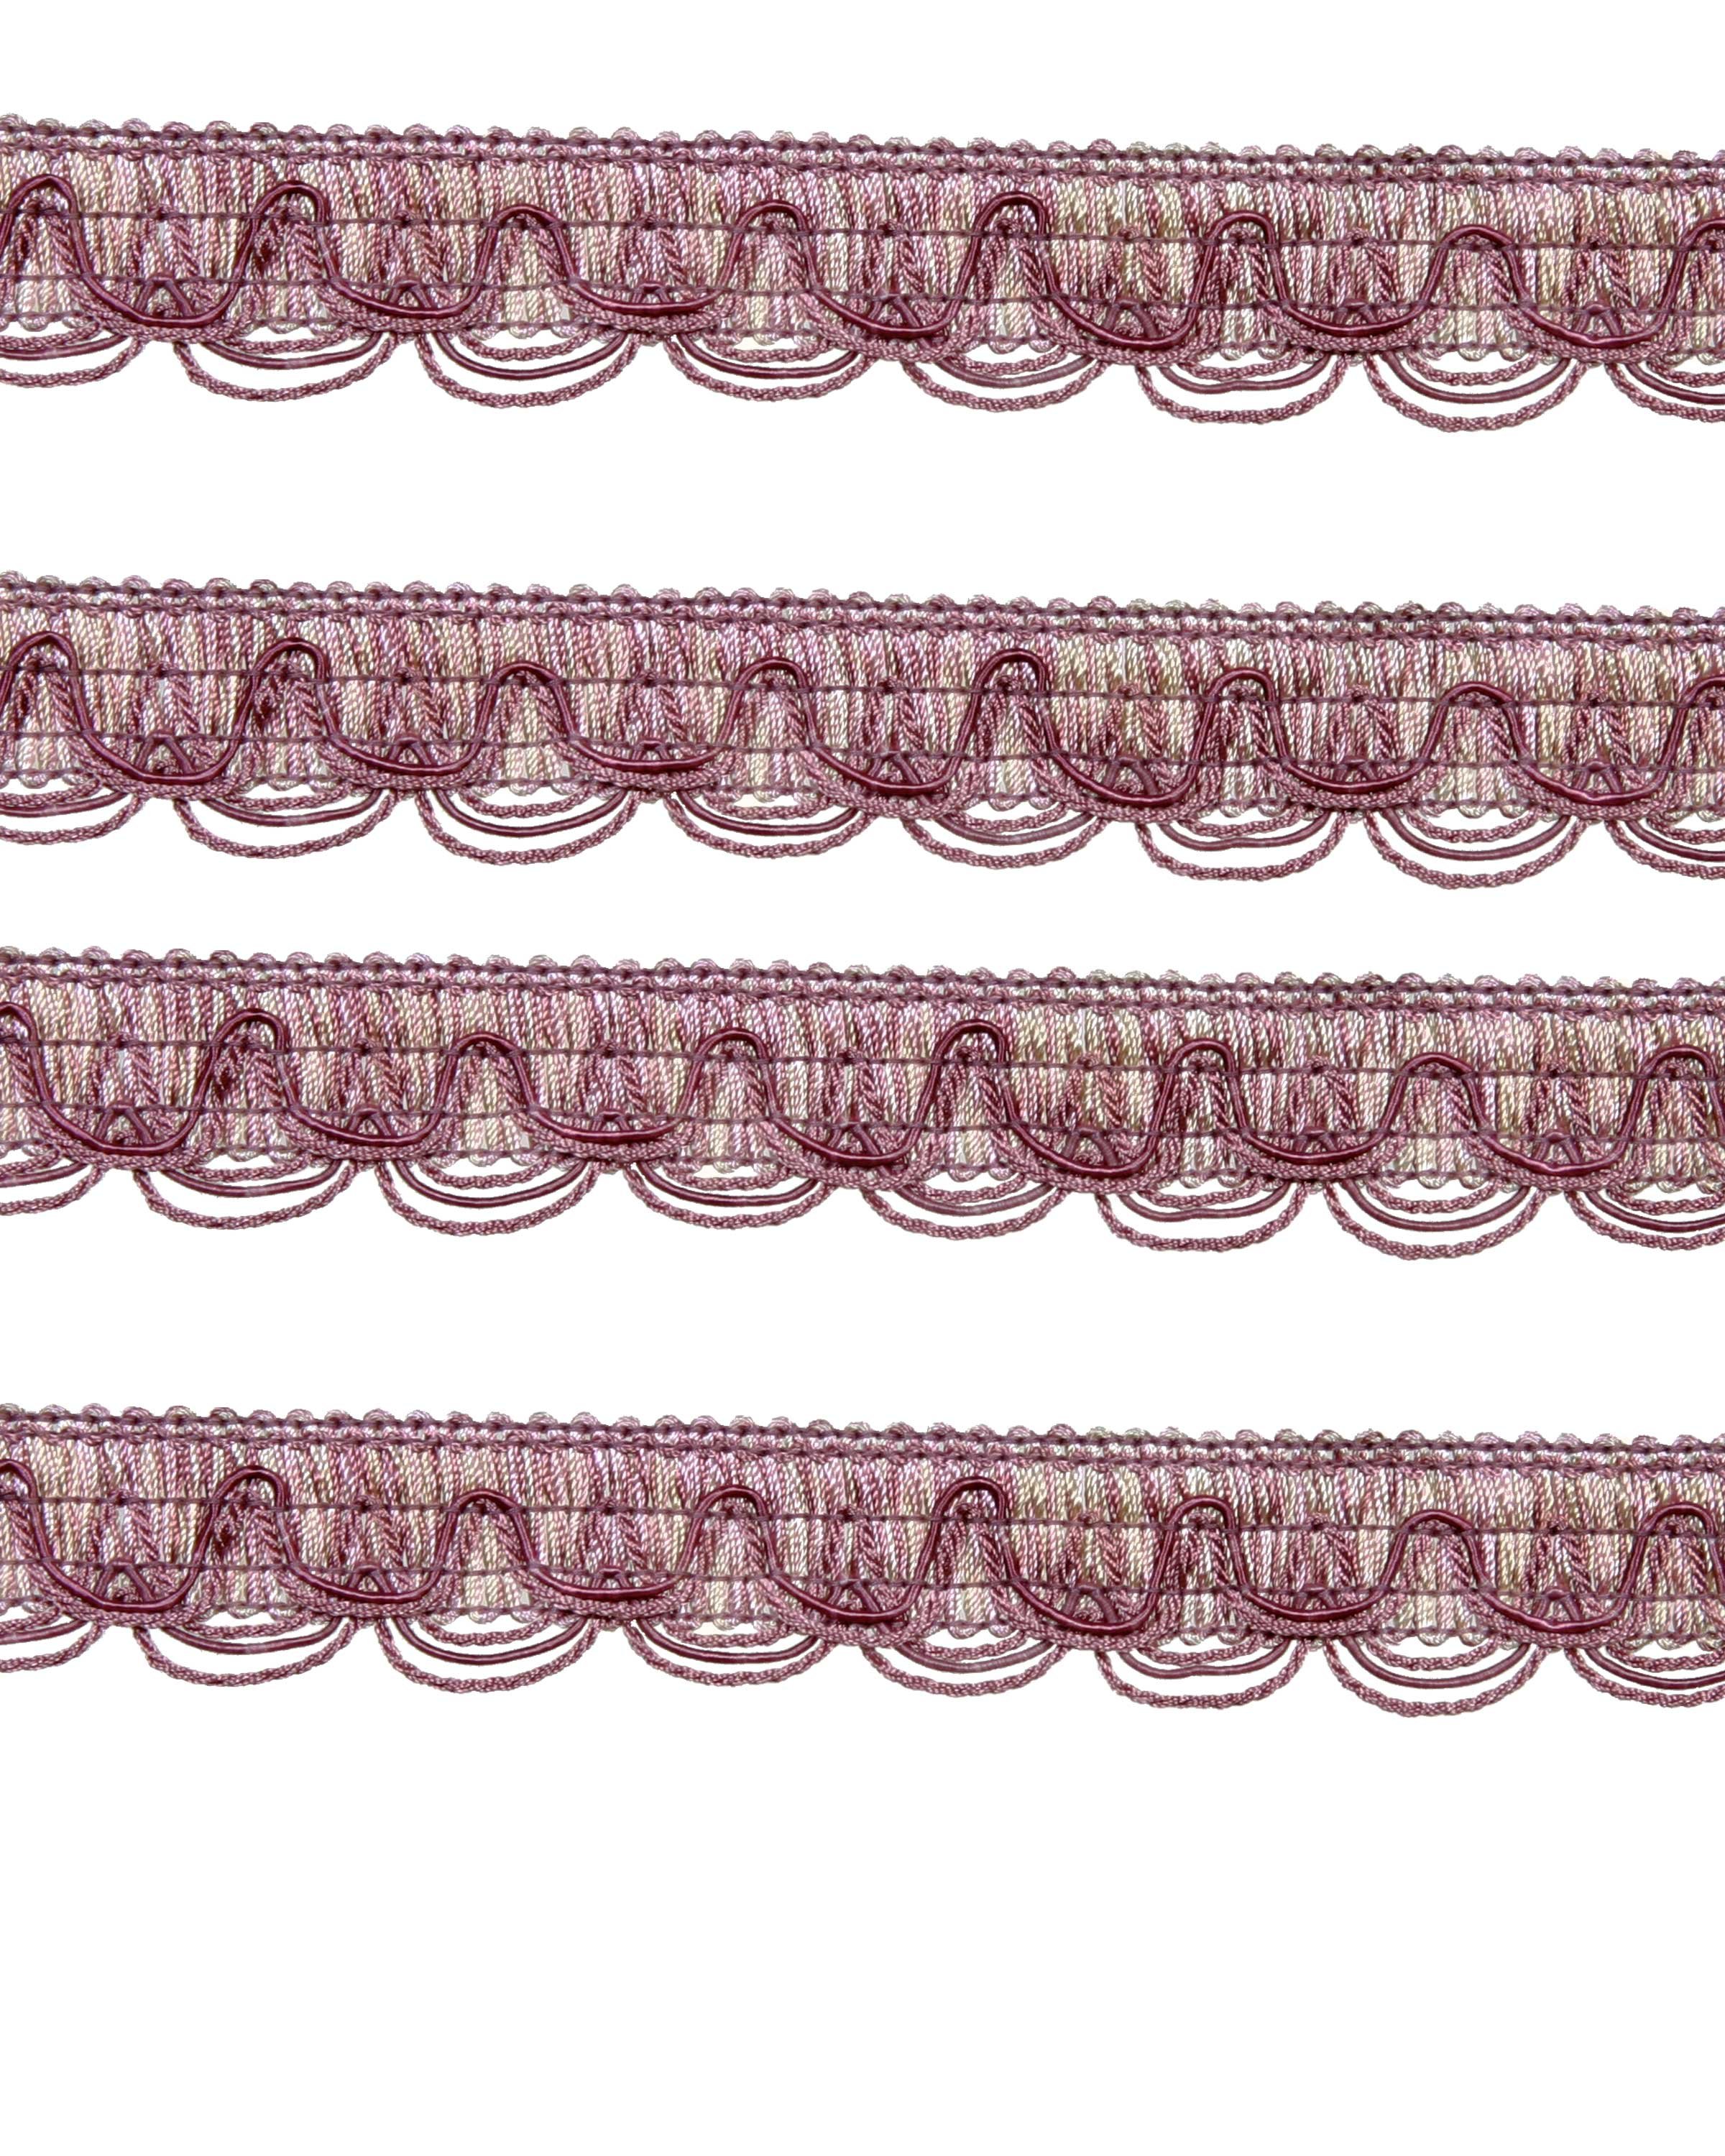 Scalloped Looped Braid - Dusky Pink 30mm Price is for 5 metres